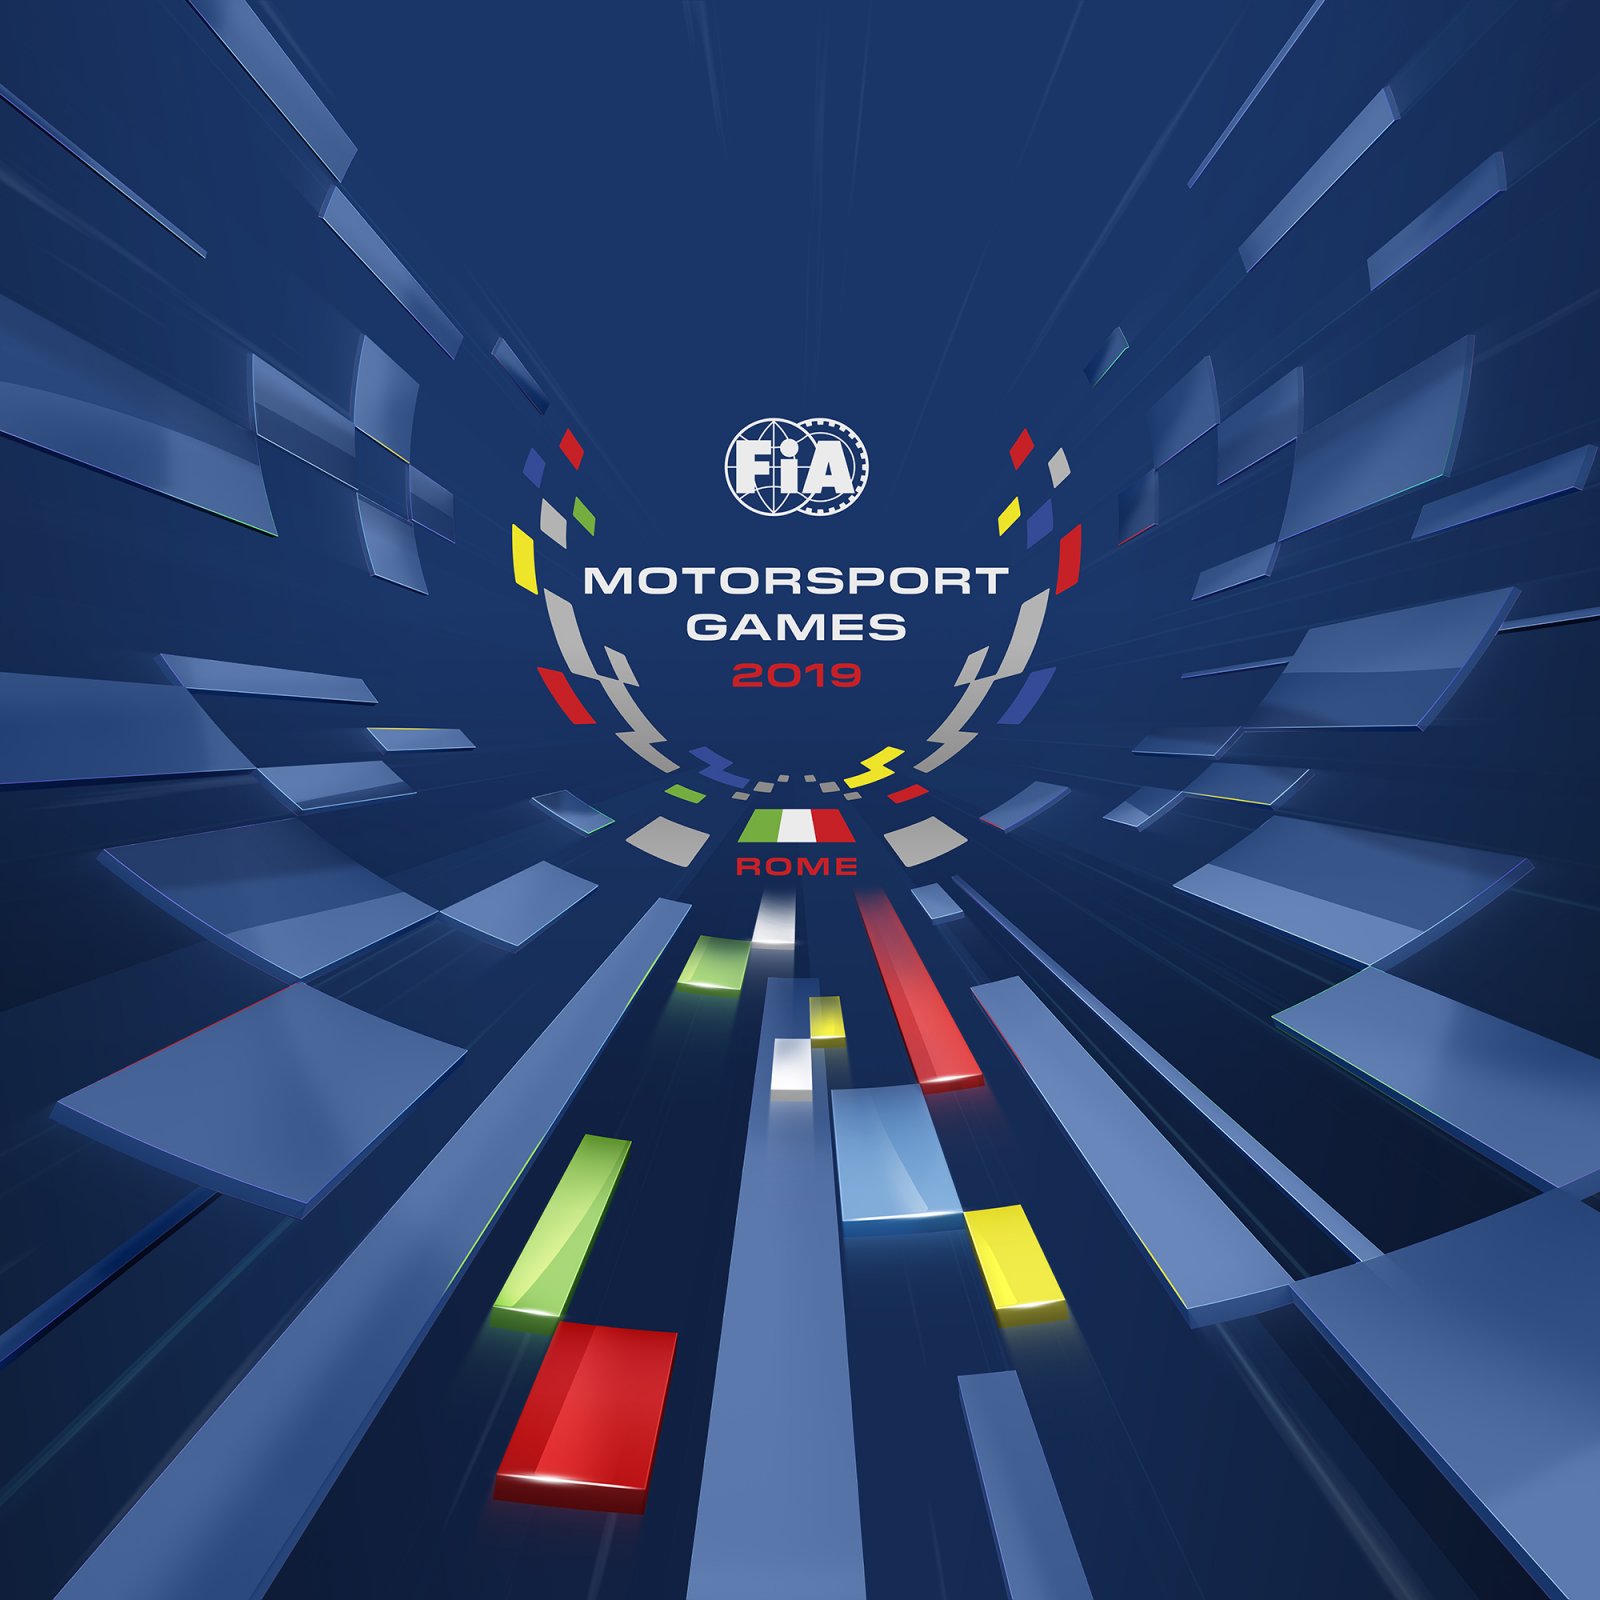 FIA Motorsport Games marks Earth Day by compensating carbon footprint to support vital environmental projects